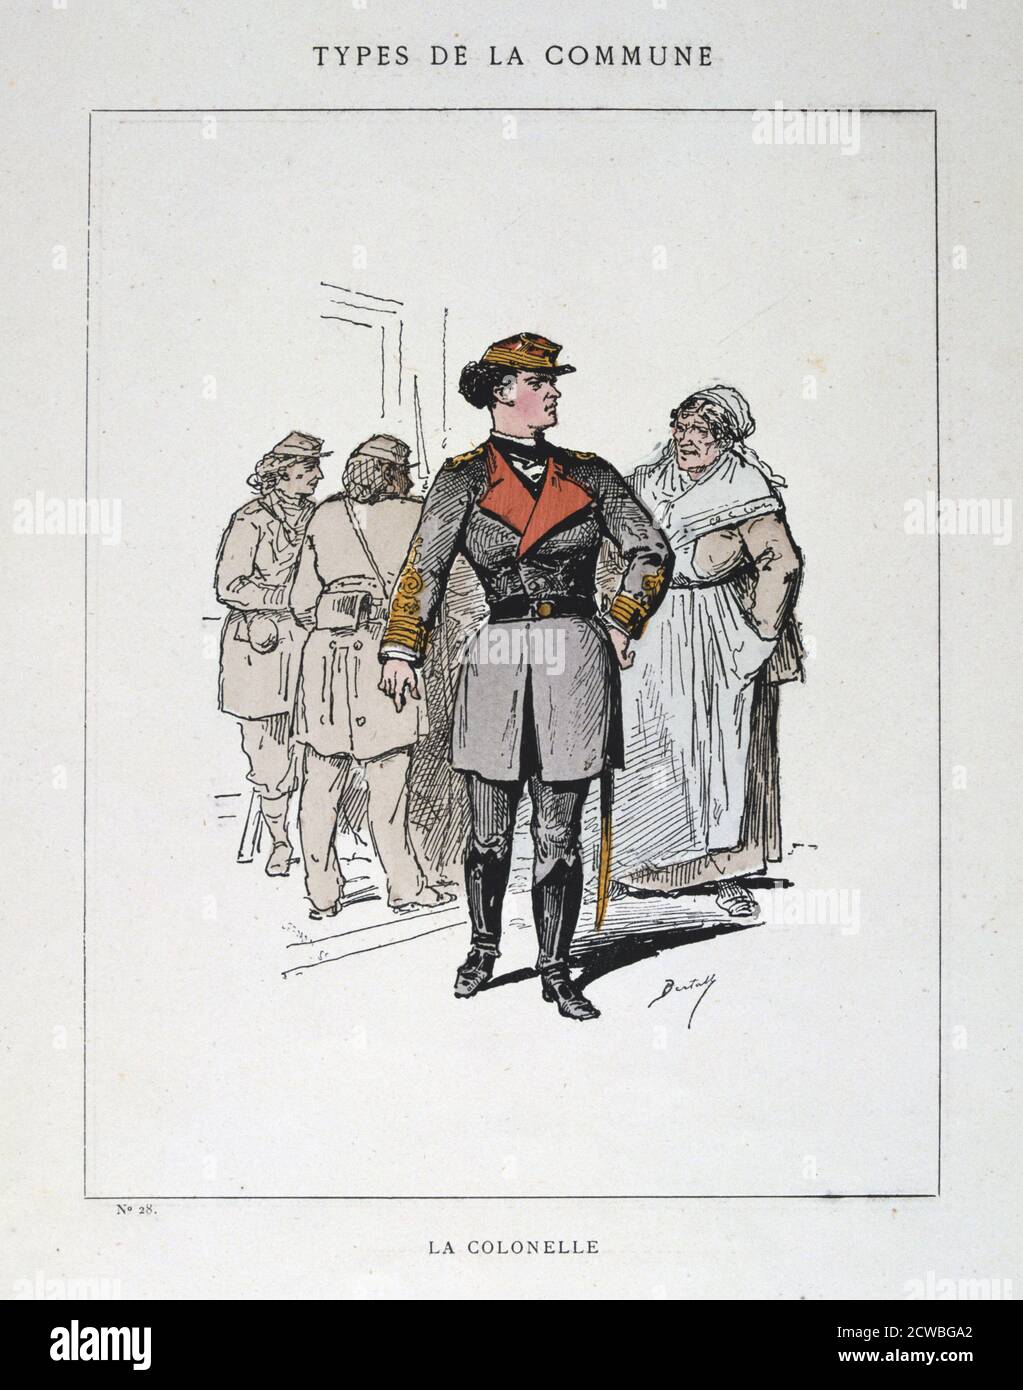 La Colonelle', Paris Commune, 1871. Cartoon from a series titled Types de la Commune. The Paris Commune was established when the citizens of Paris, many of them armed National Guards, rebelled against the policies of the conservative government formed after the end of the Franco-Prussian War. The left-wing regime of the Commune held sway in Paris for two months until government troops retook the city in bloody fighting in May 1871. The events of the Commune were an inspiration to Karl Marx as well as later communist leaders including Lenin, Trotsky and Mao. From a private collection. Stock Photo